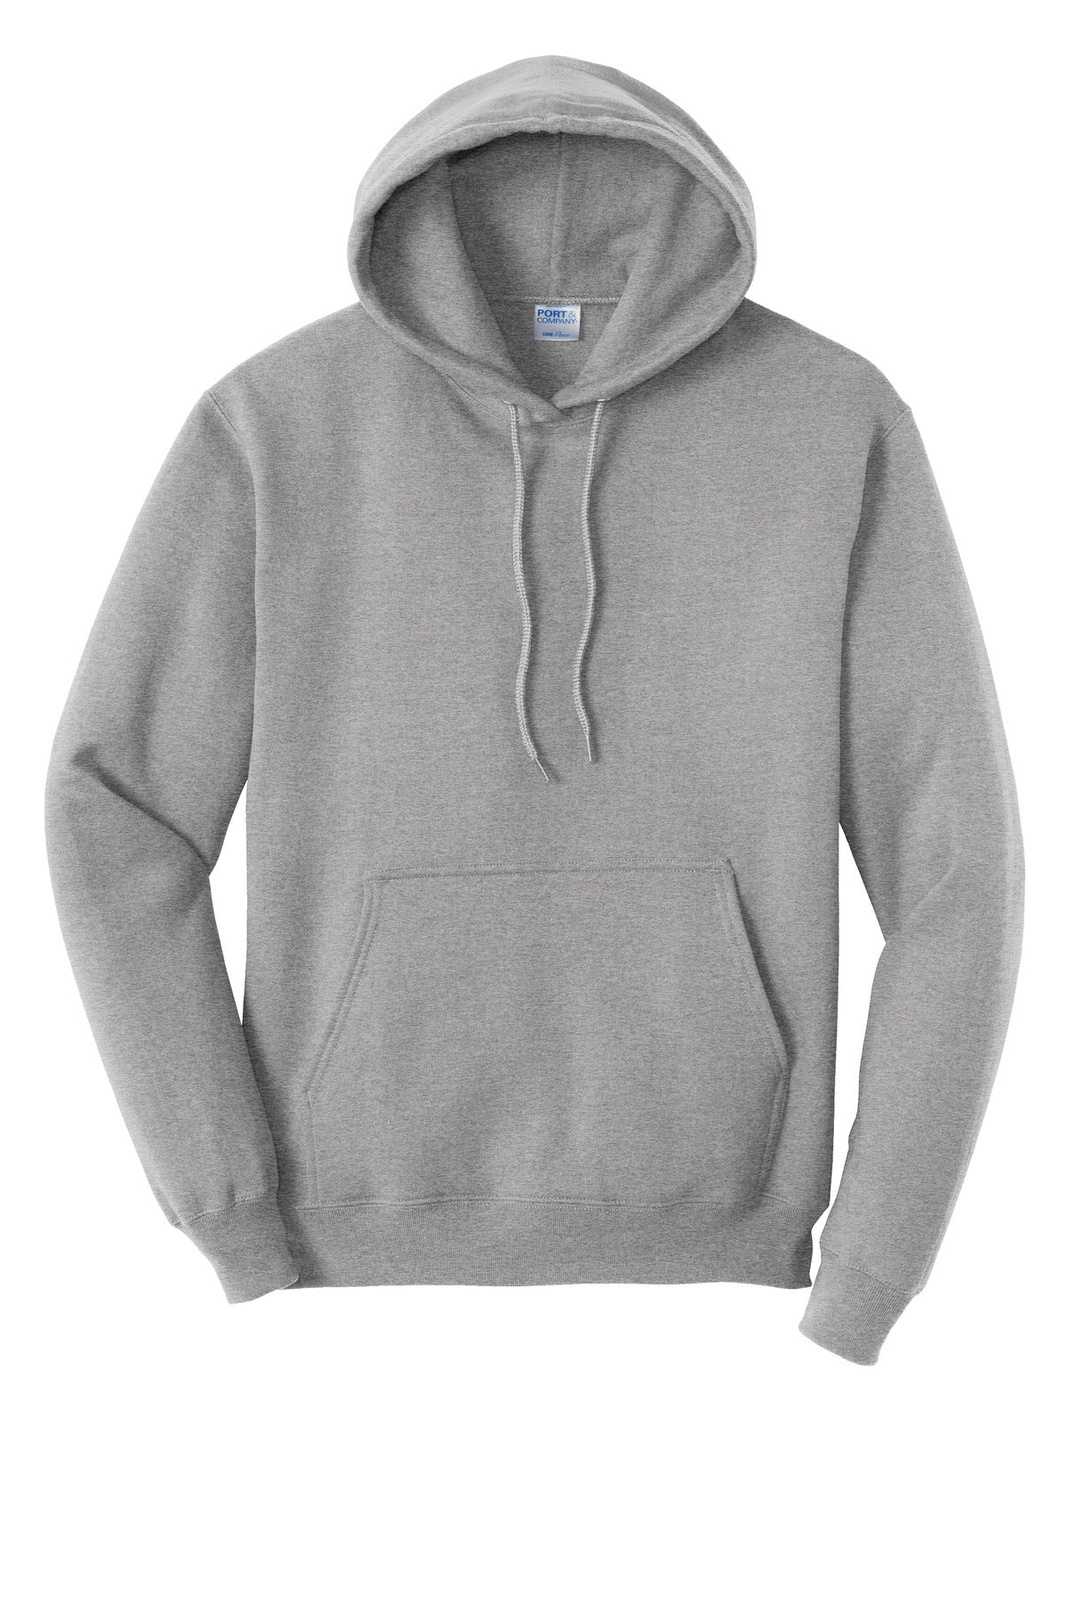 Port & Company PC79H Fleece Pullover Hooded Sweatshirt - Athletic Heather - HIT a Double - 1